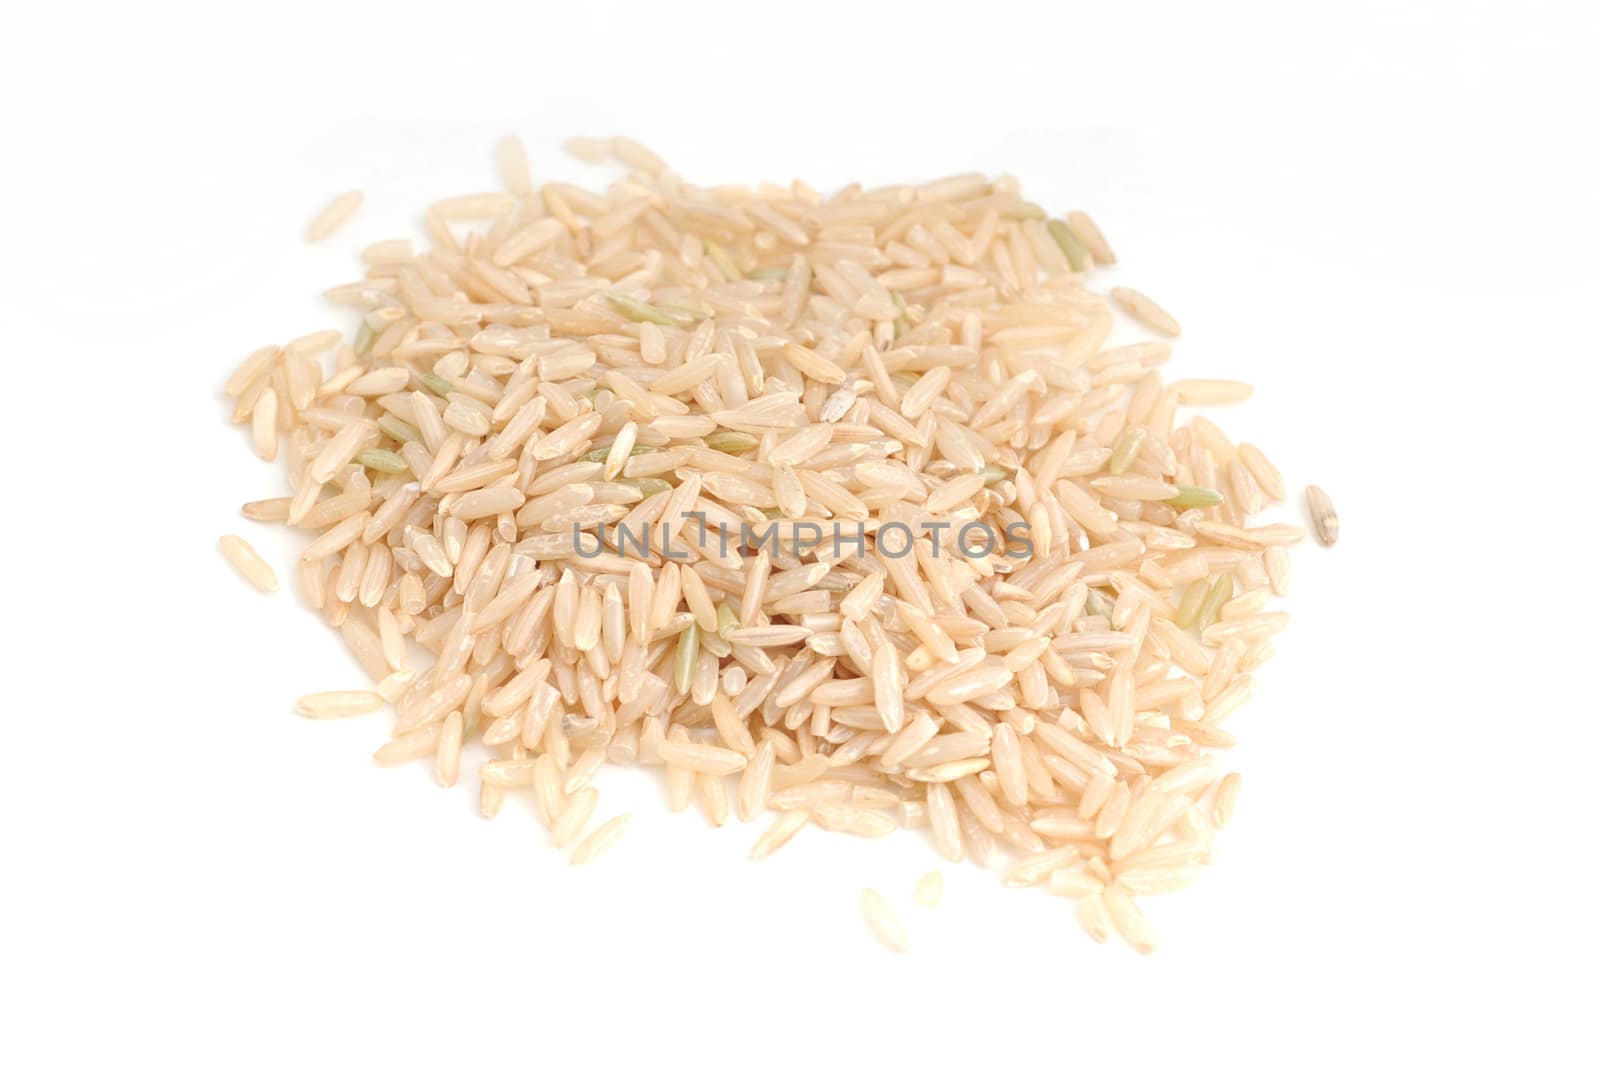 Brown Rice on White by ftlaudgirl